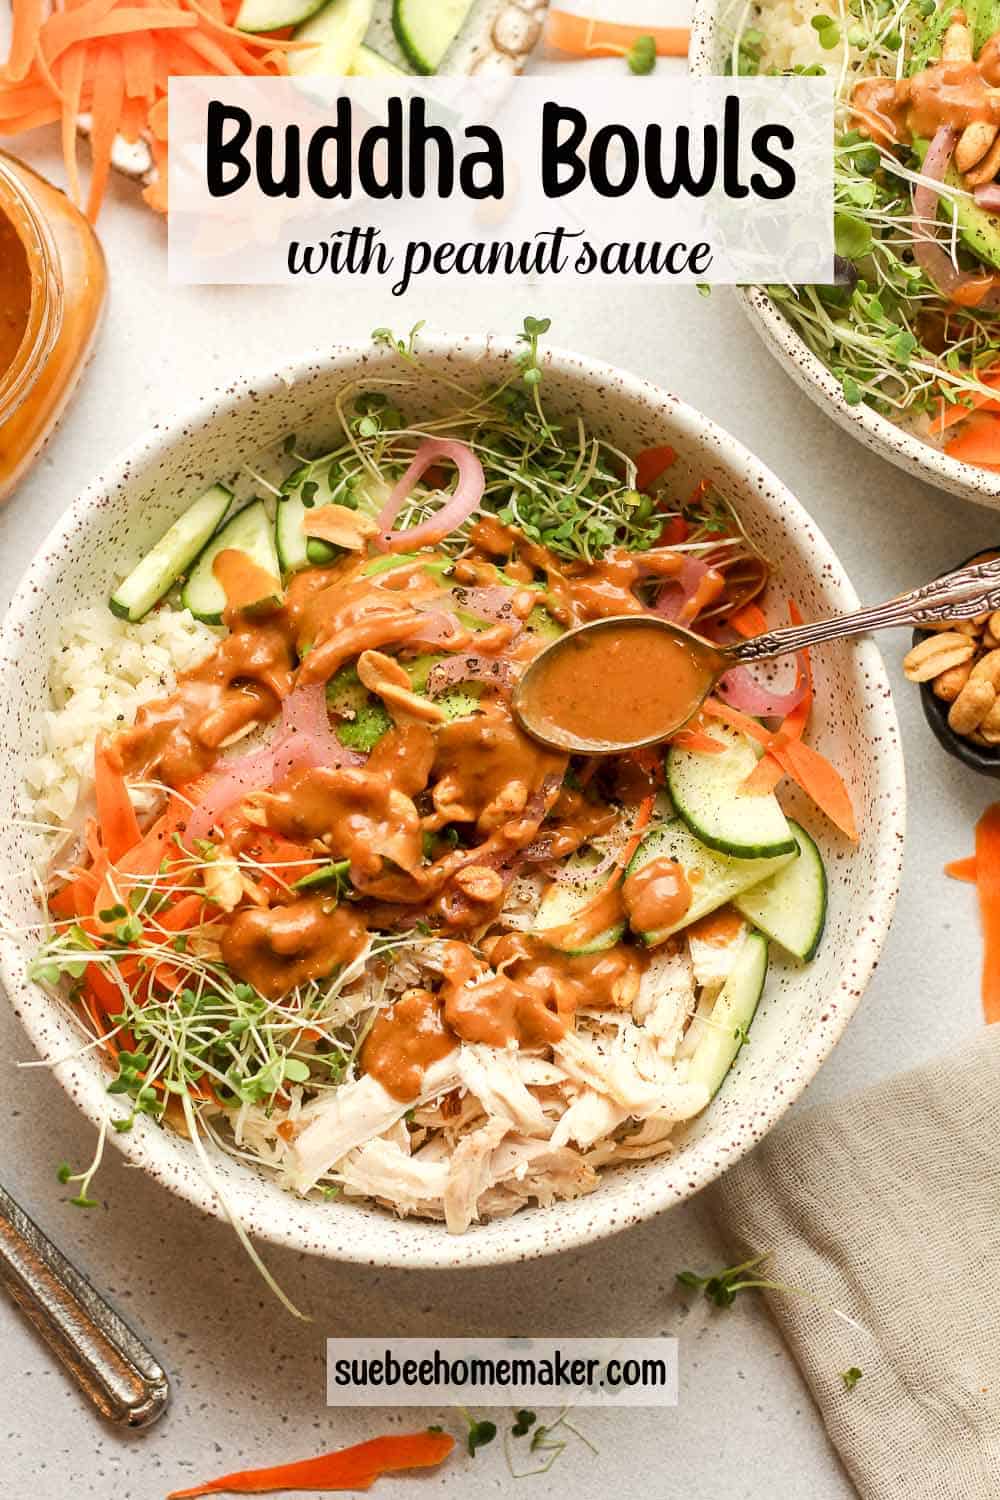 A rice bowl with chicken, veggies and peanut sauce.